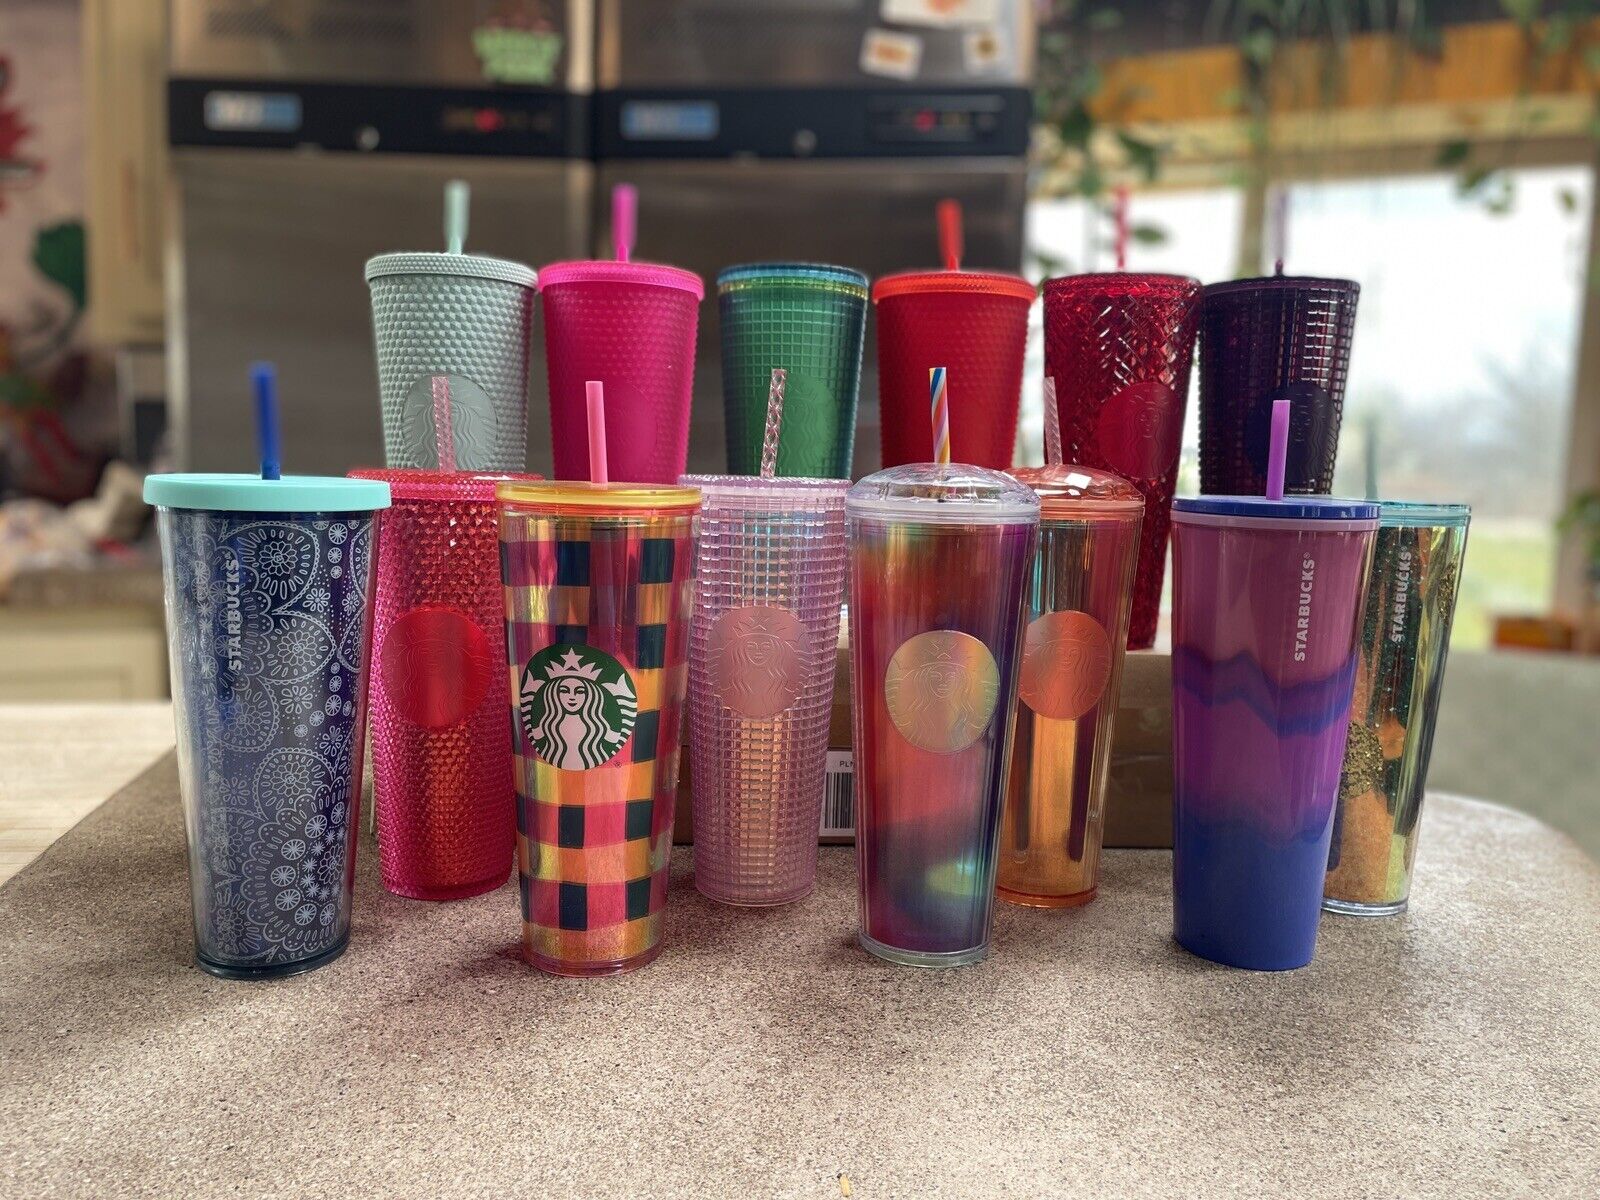 LOT of 14 Starbucks 24 oz Tumblers VENTI CUPS - Colorful, Pink, Red, Blue